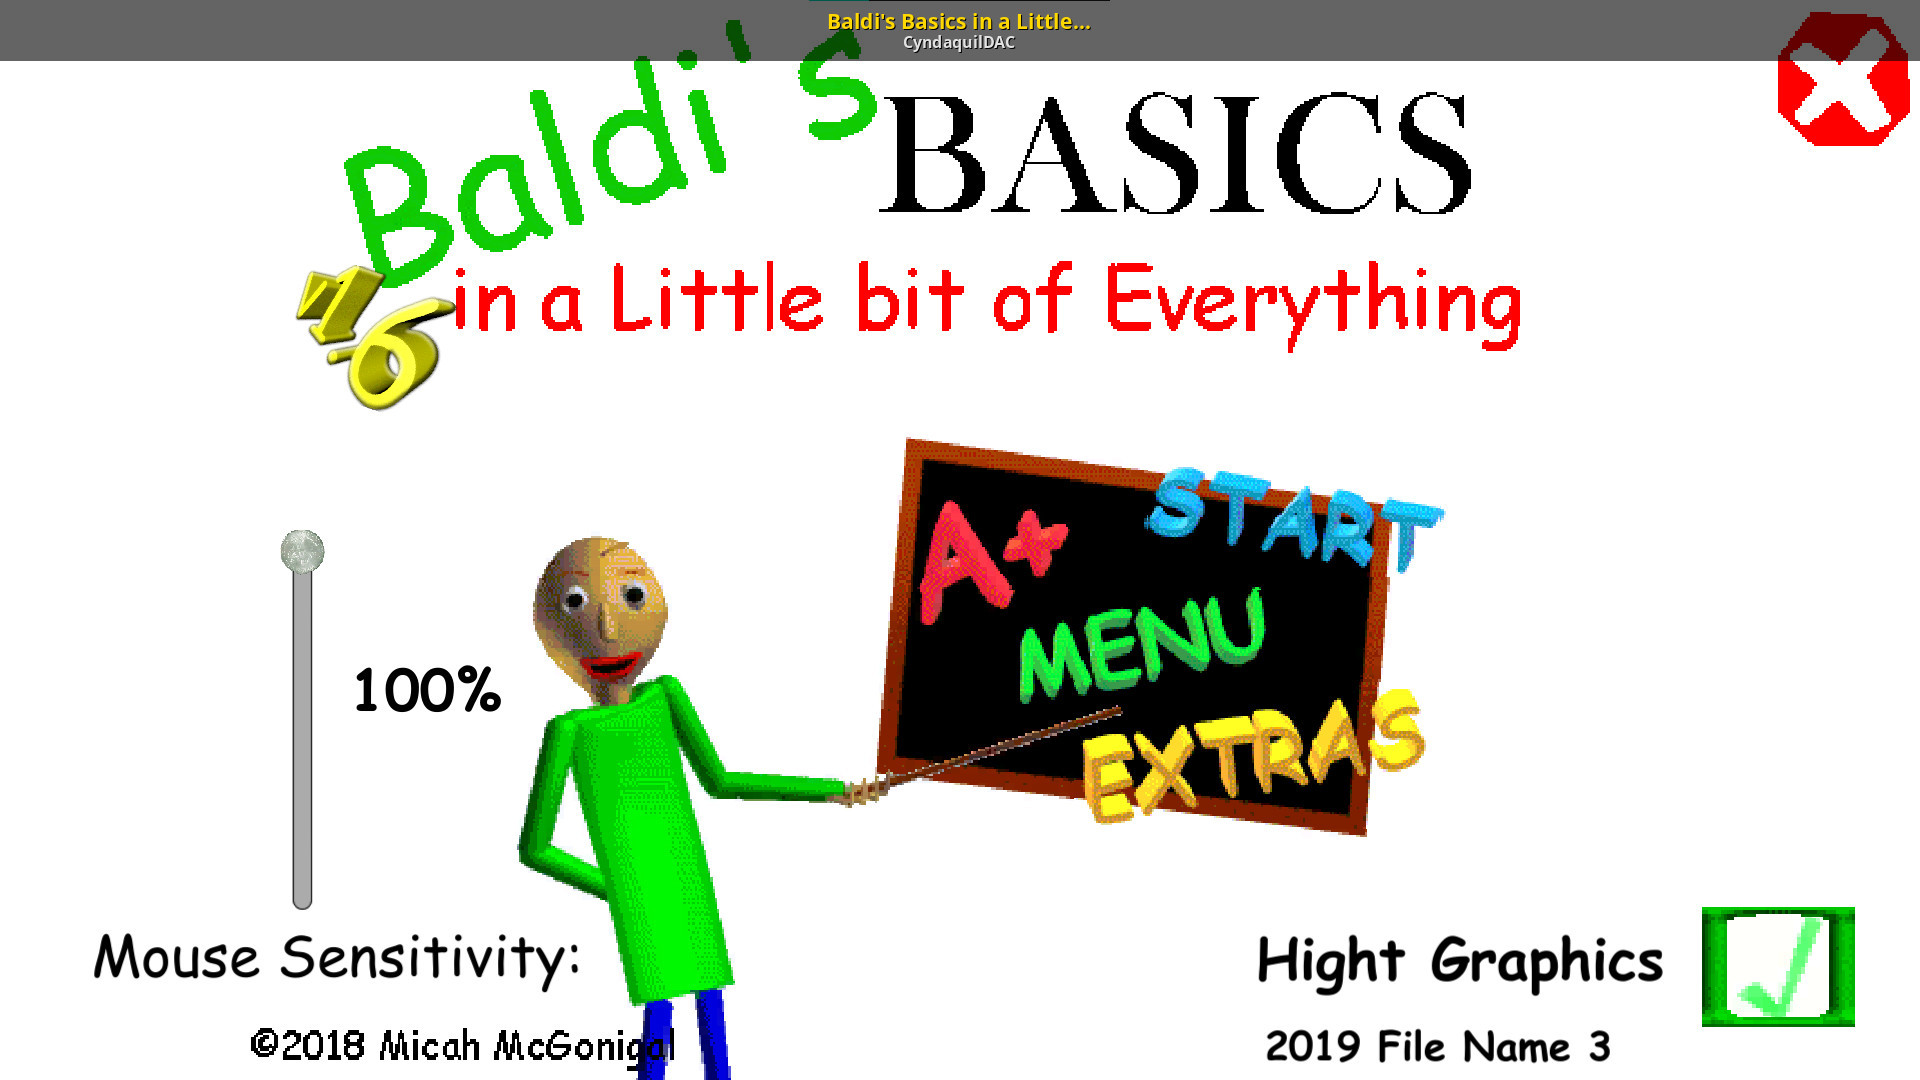 Everything 1 5. Baldi a little bit of everything. Baldi Basics a little bit of everything. Baldi s Basics in a little bit of everything. БАЛДИ ФНФ.